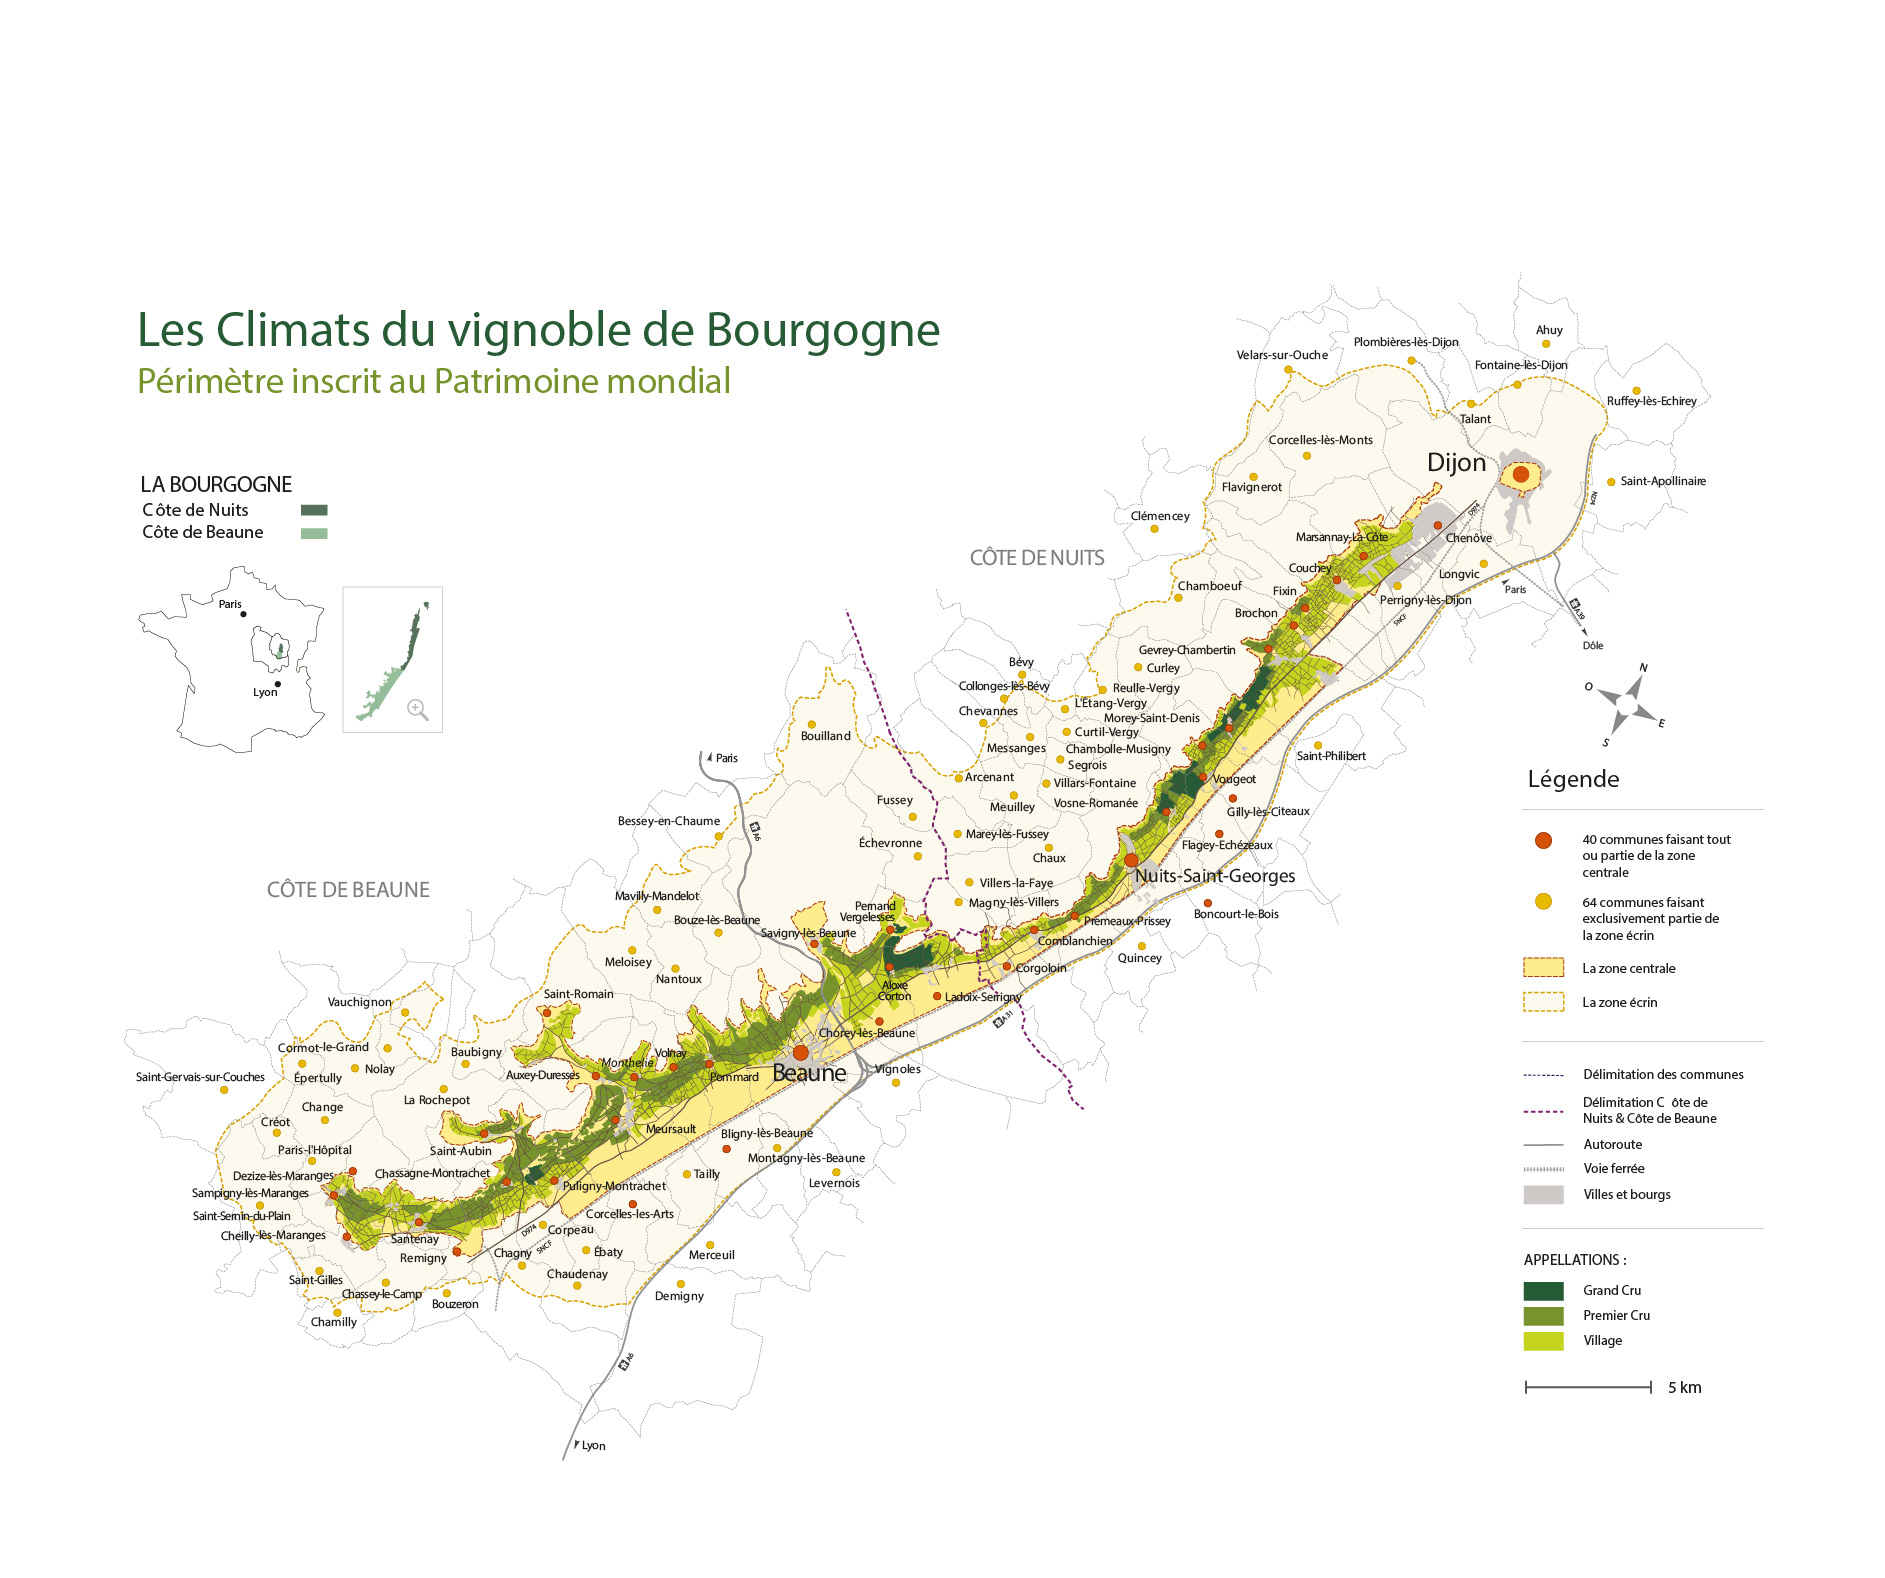 Area of the Climats of Bourgogne